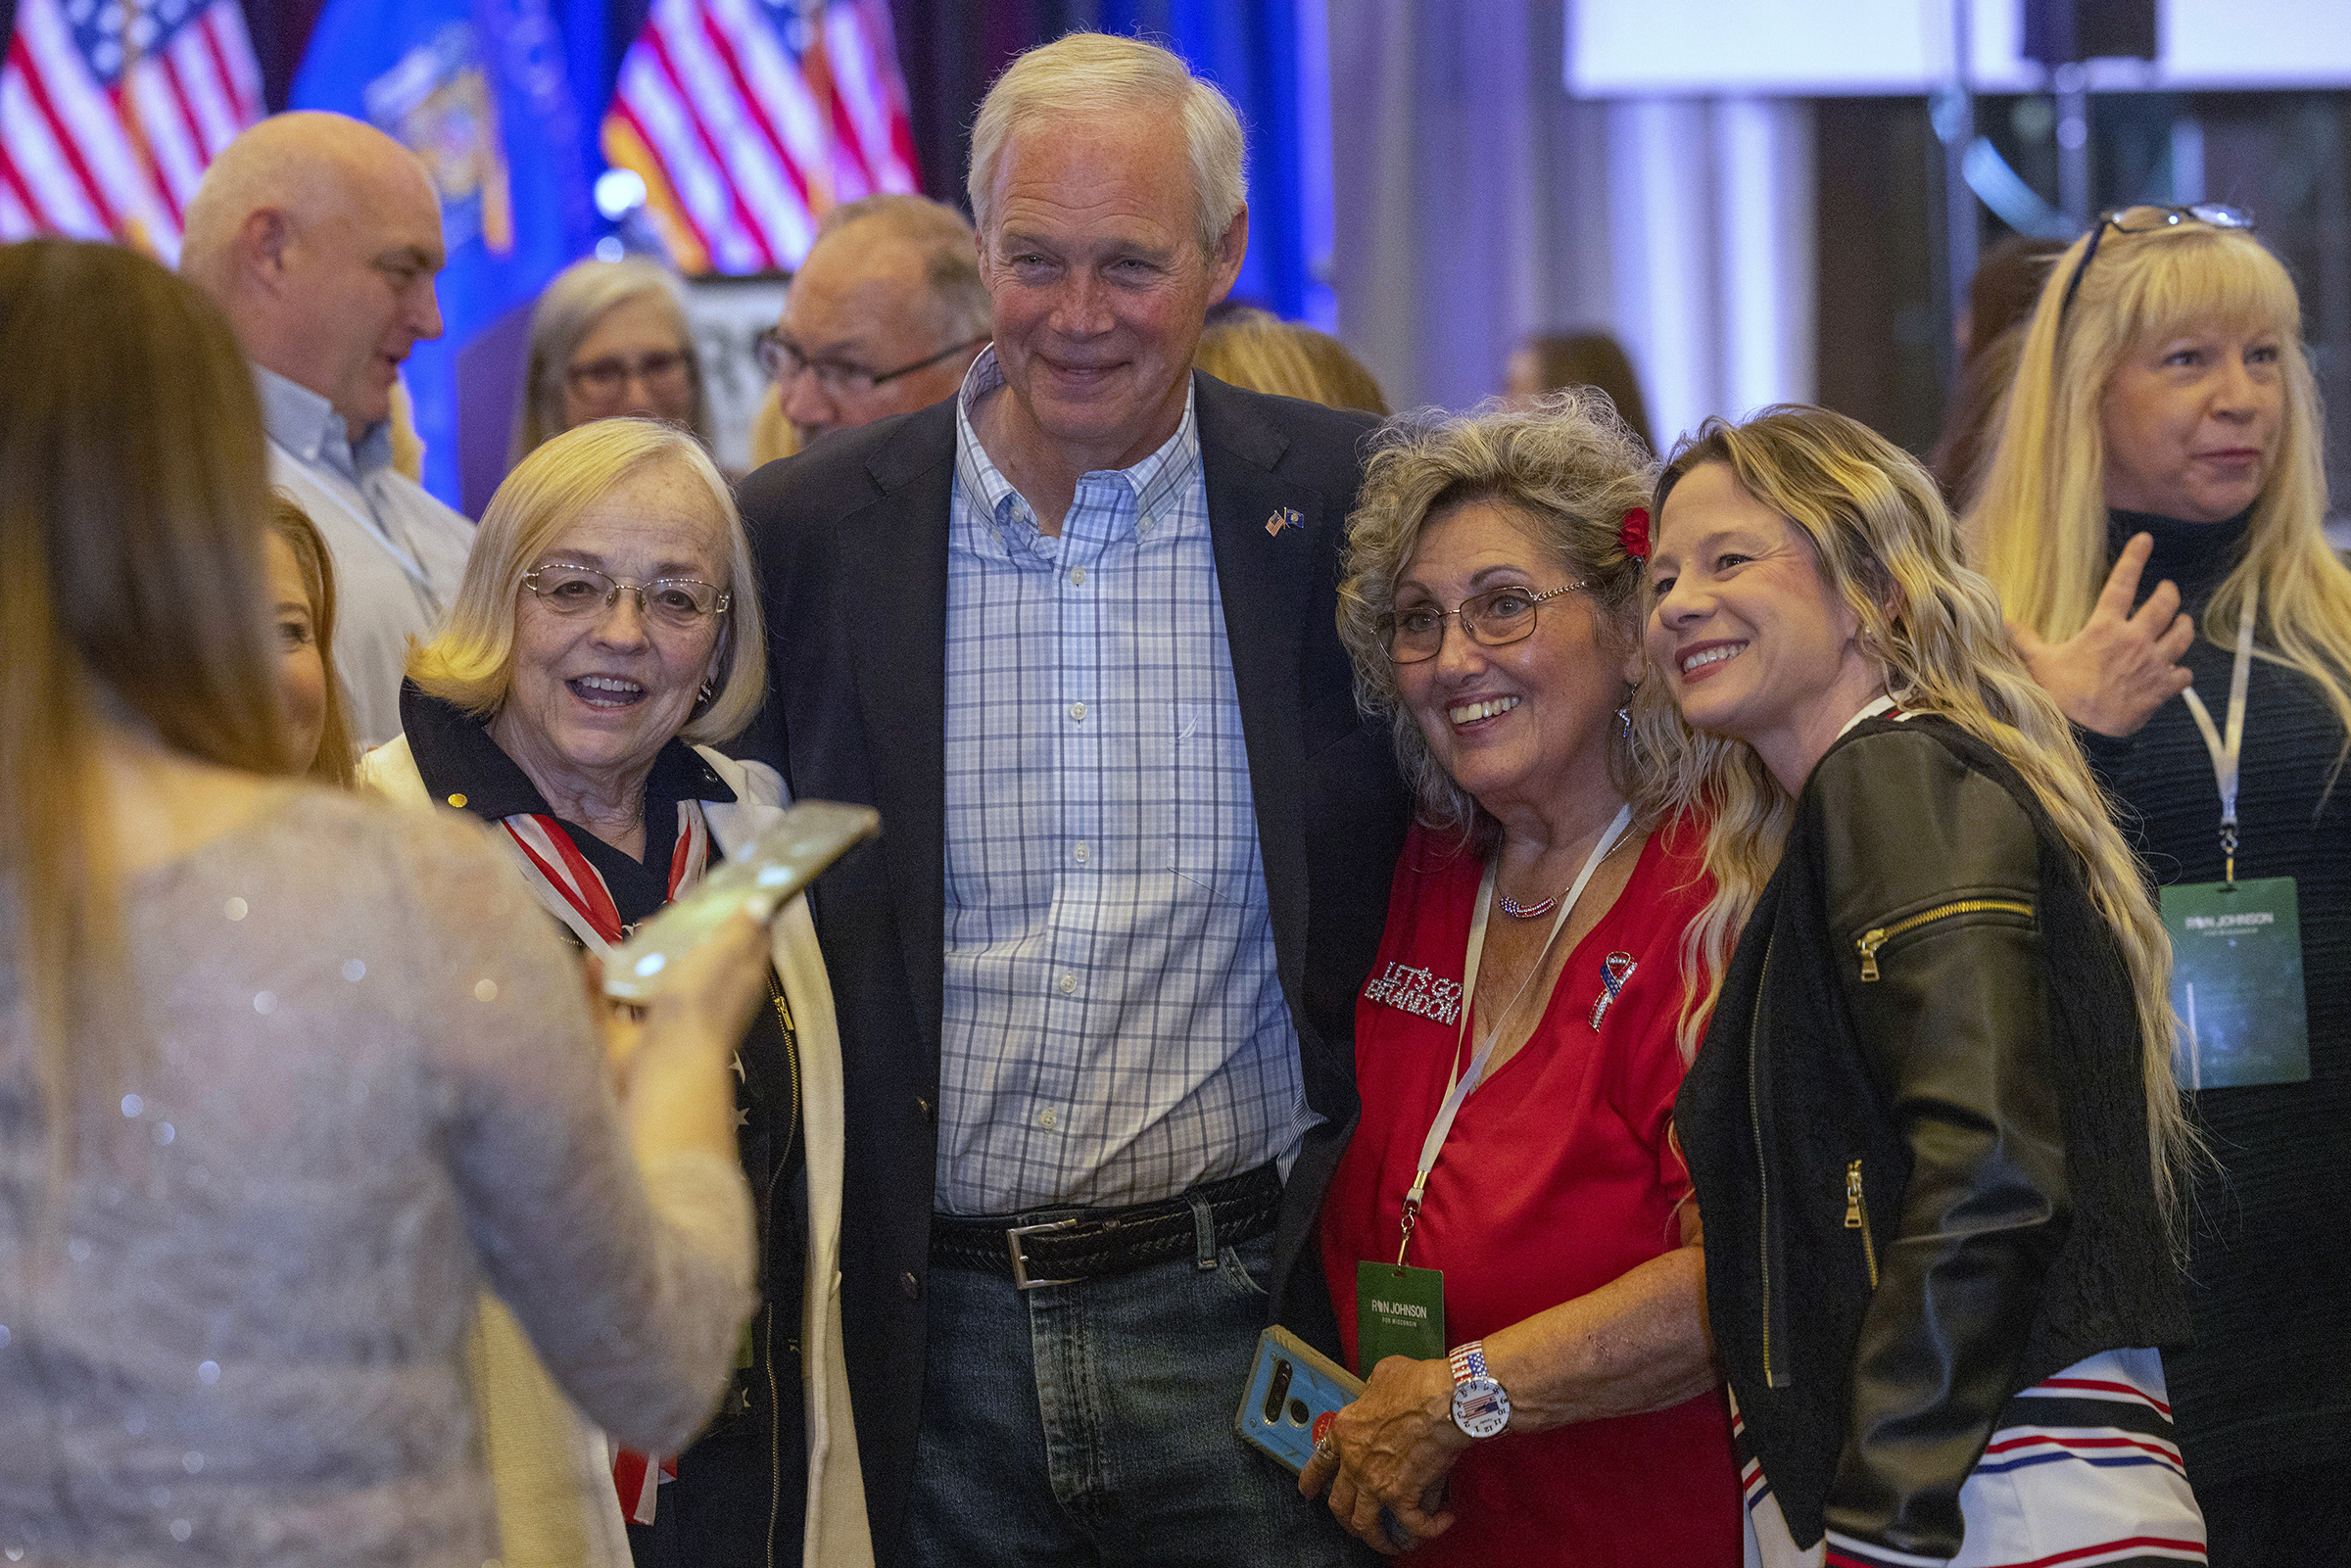 ‘This race is over’: Ron Johnson declares victory over Mandela Barnes in tight US Senate matchup